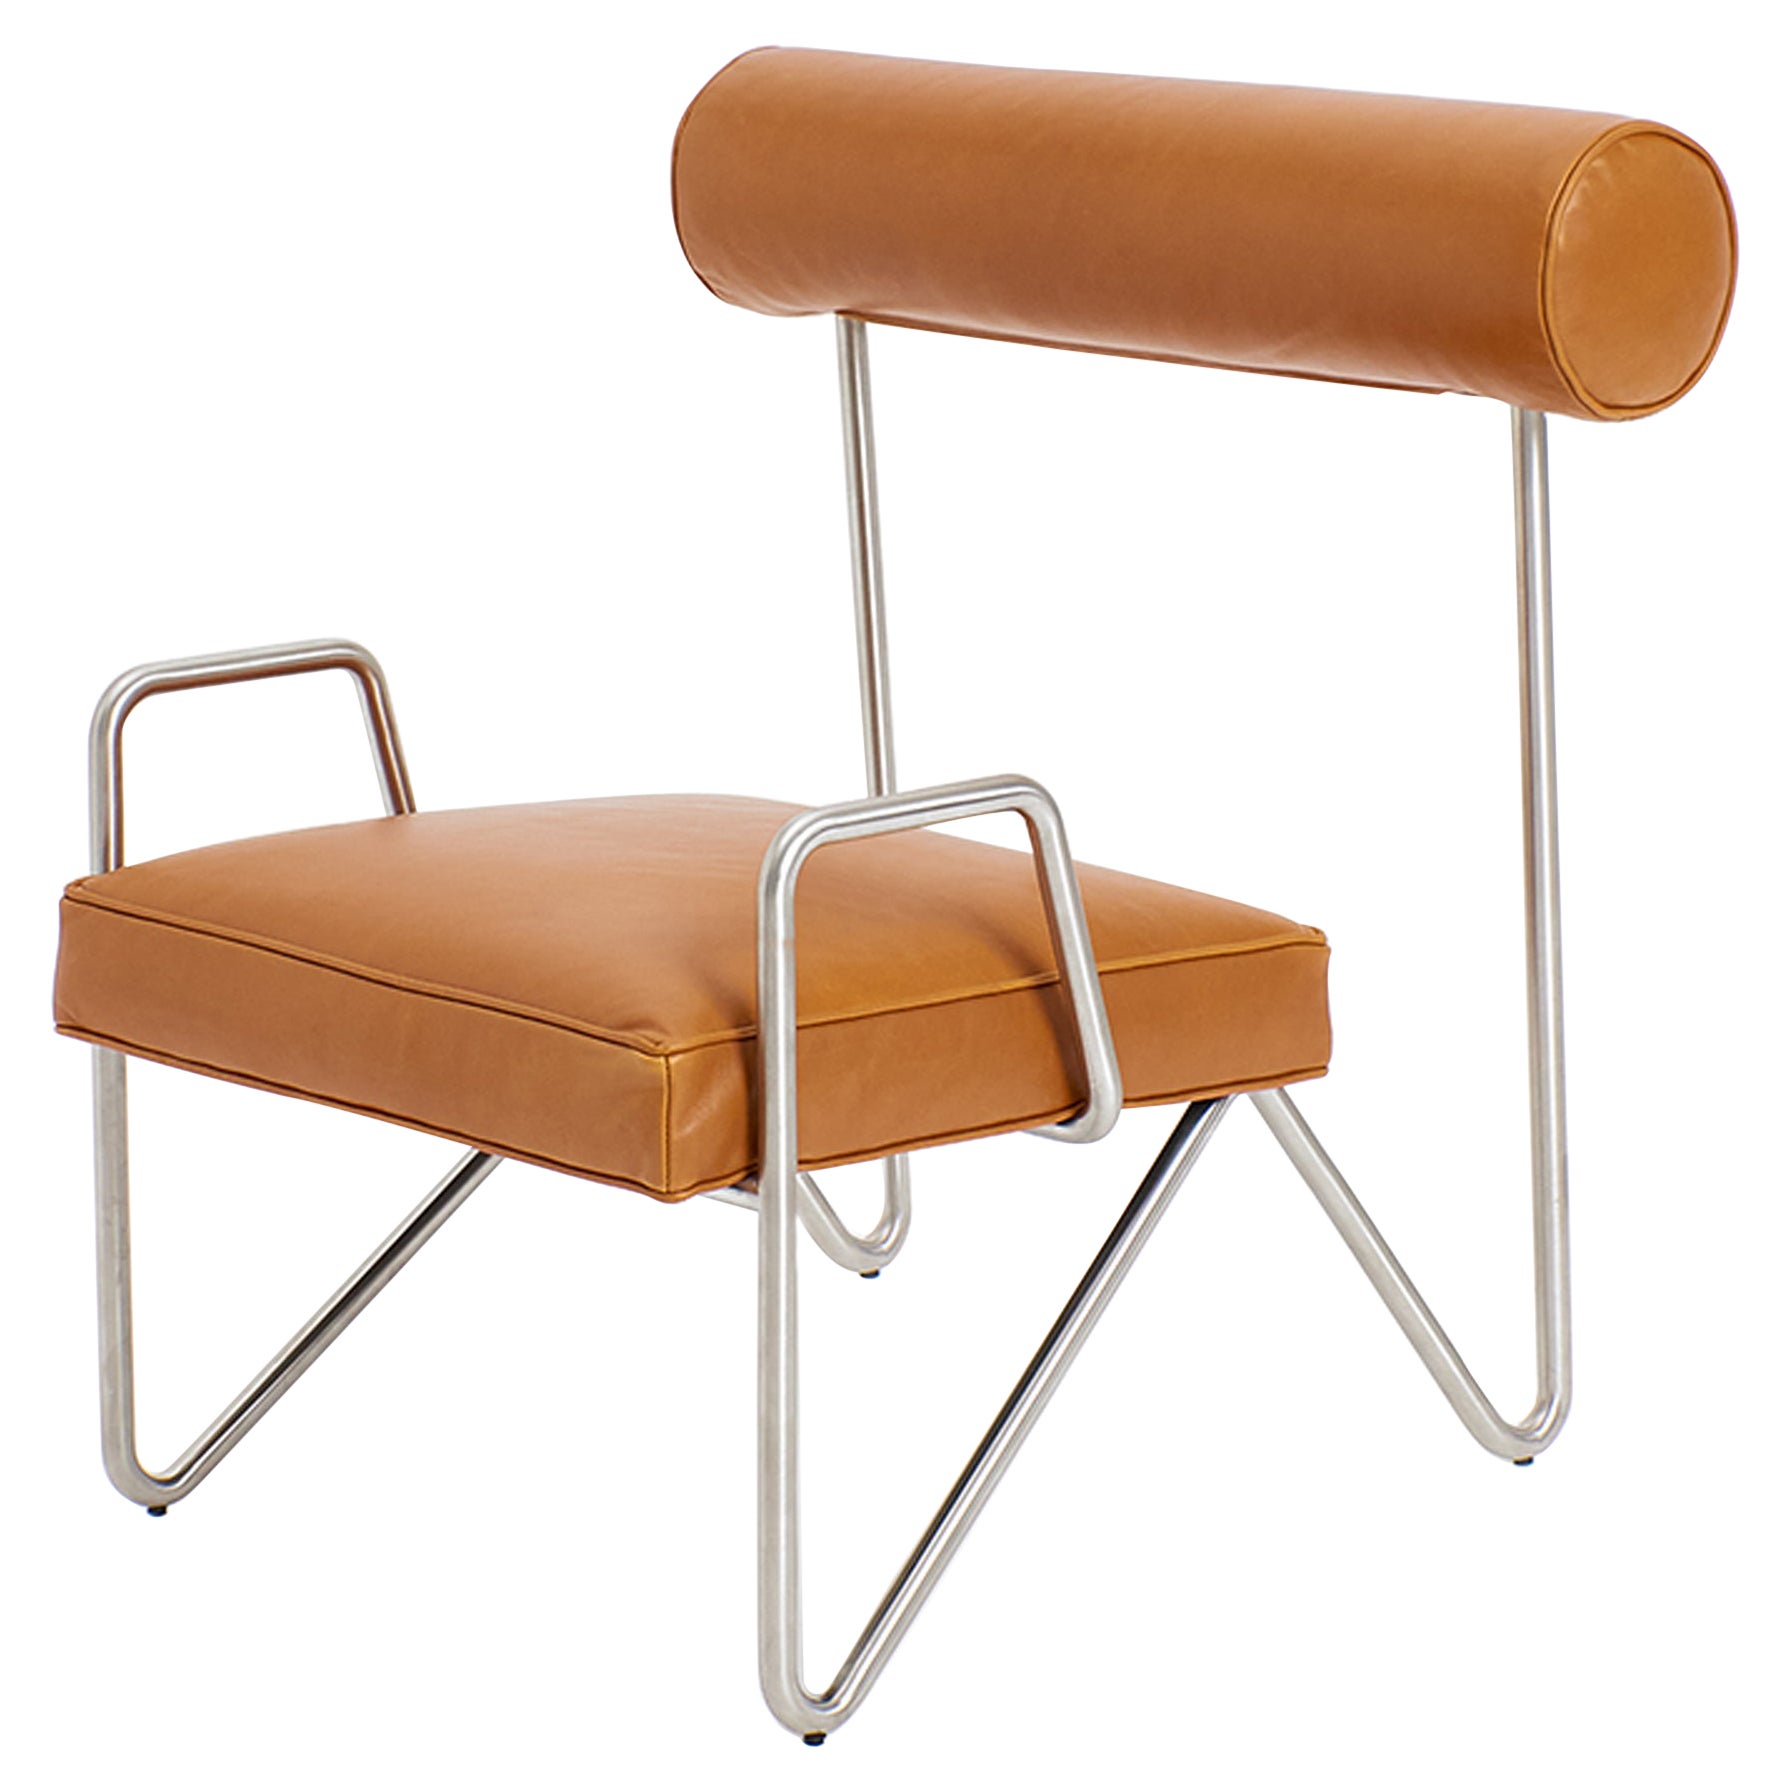 Tan Larry's Lounge Chair by Project 213A